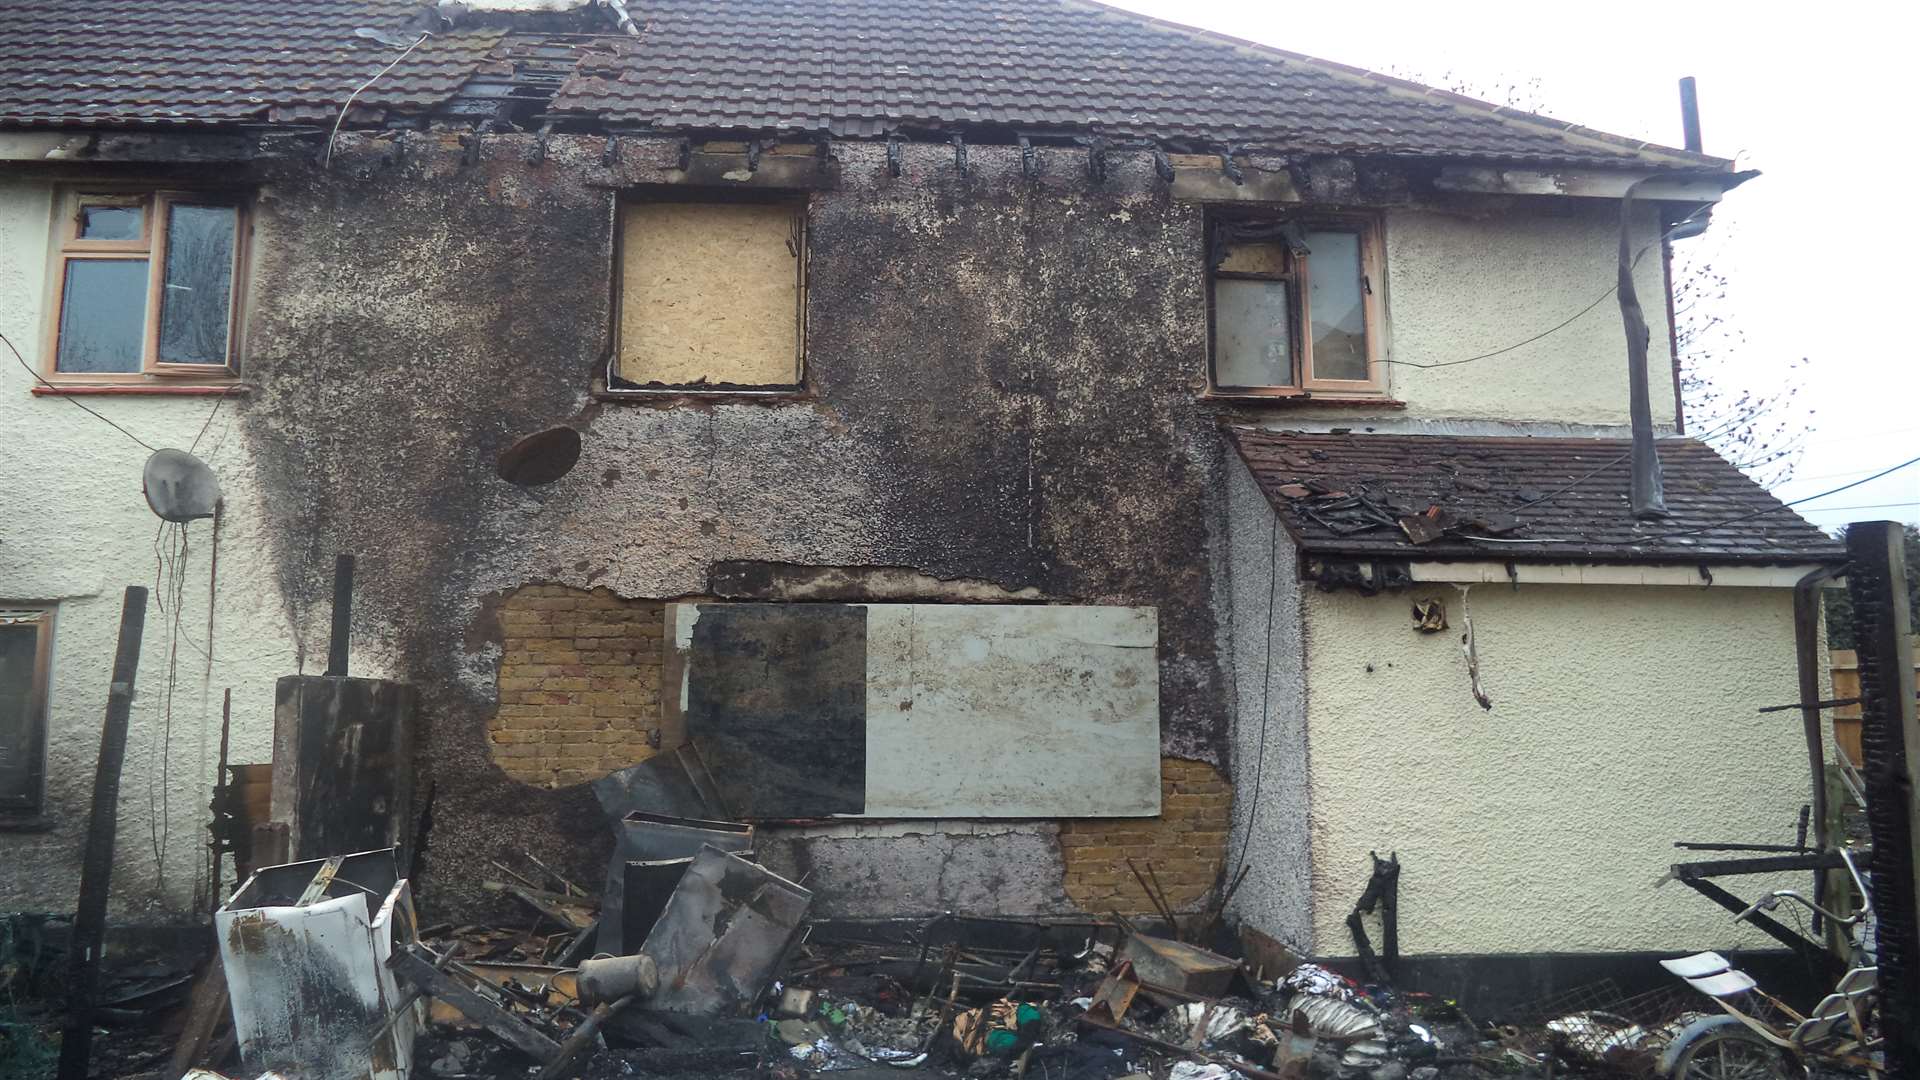 The fire damage to the back of the house